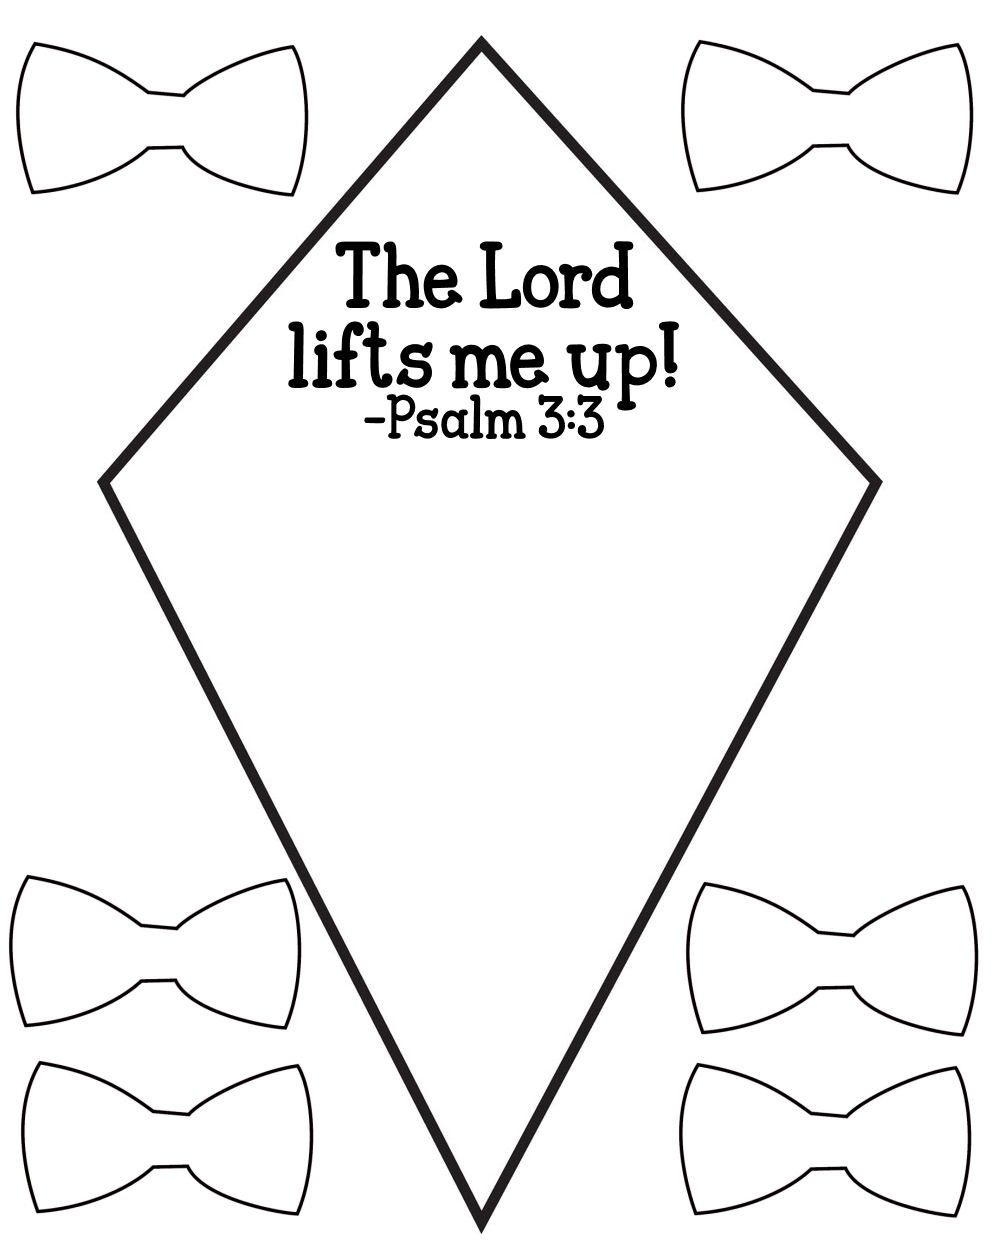 Free Psalm 3:3 Kids Bible Lesson Activity Printables - Free Printable Bible Crafts For Preschoolers